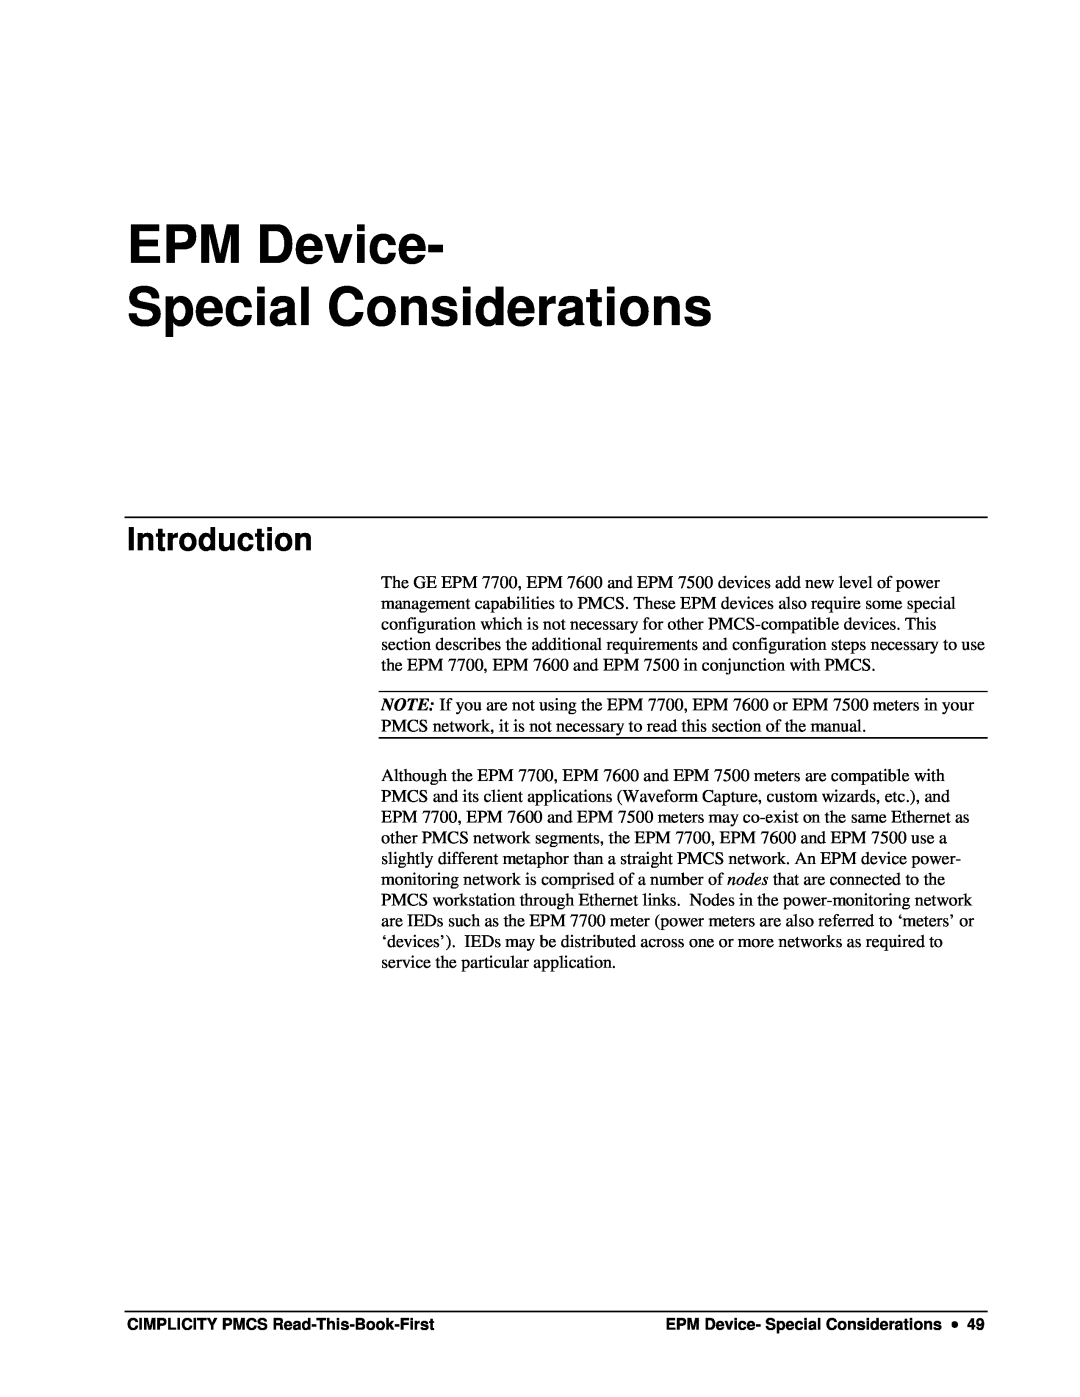 GE DEH-211 manual EPM Device Special Considerations, Introduction 